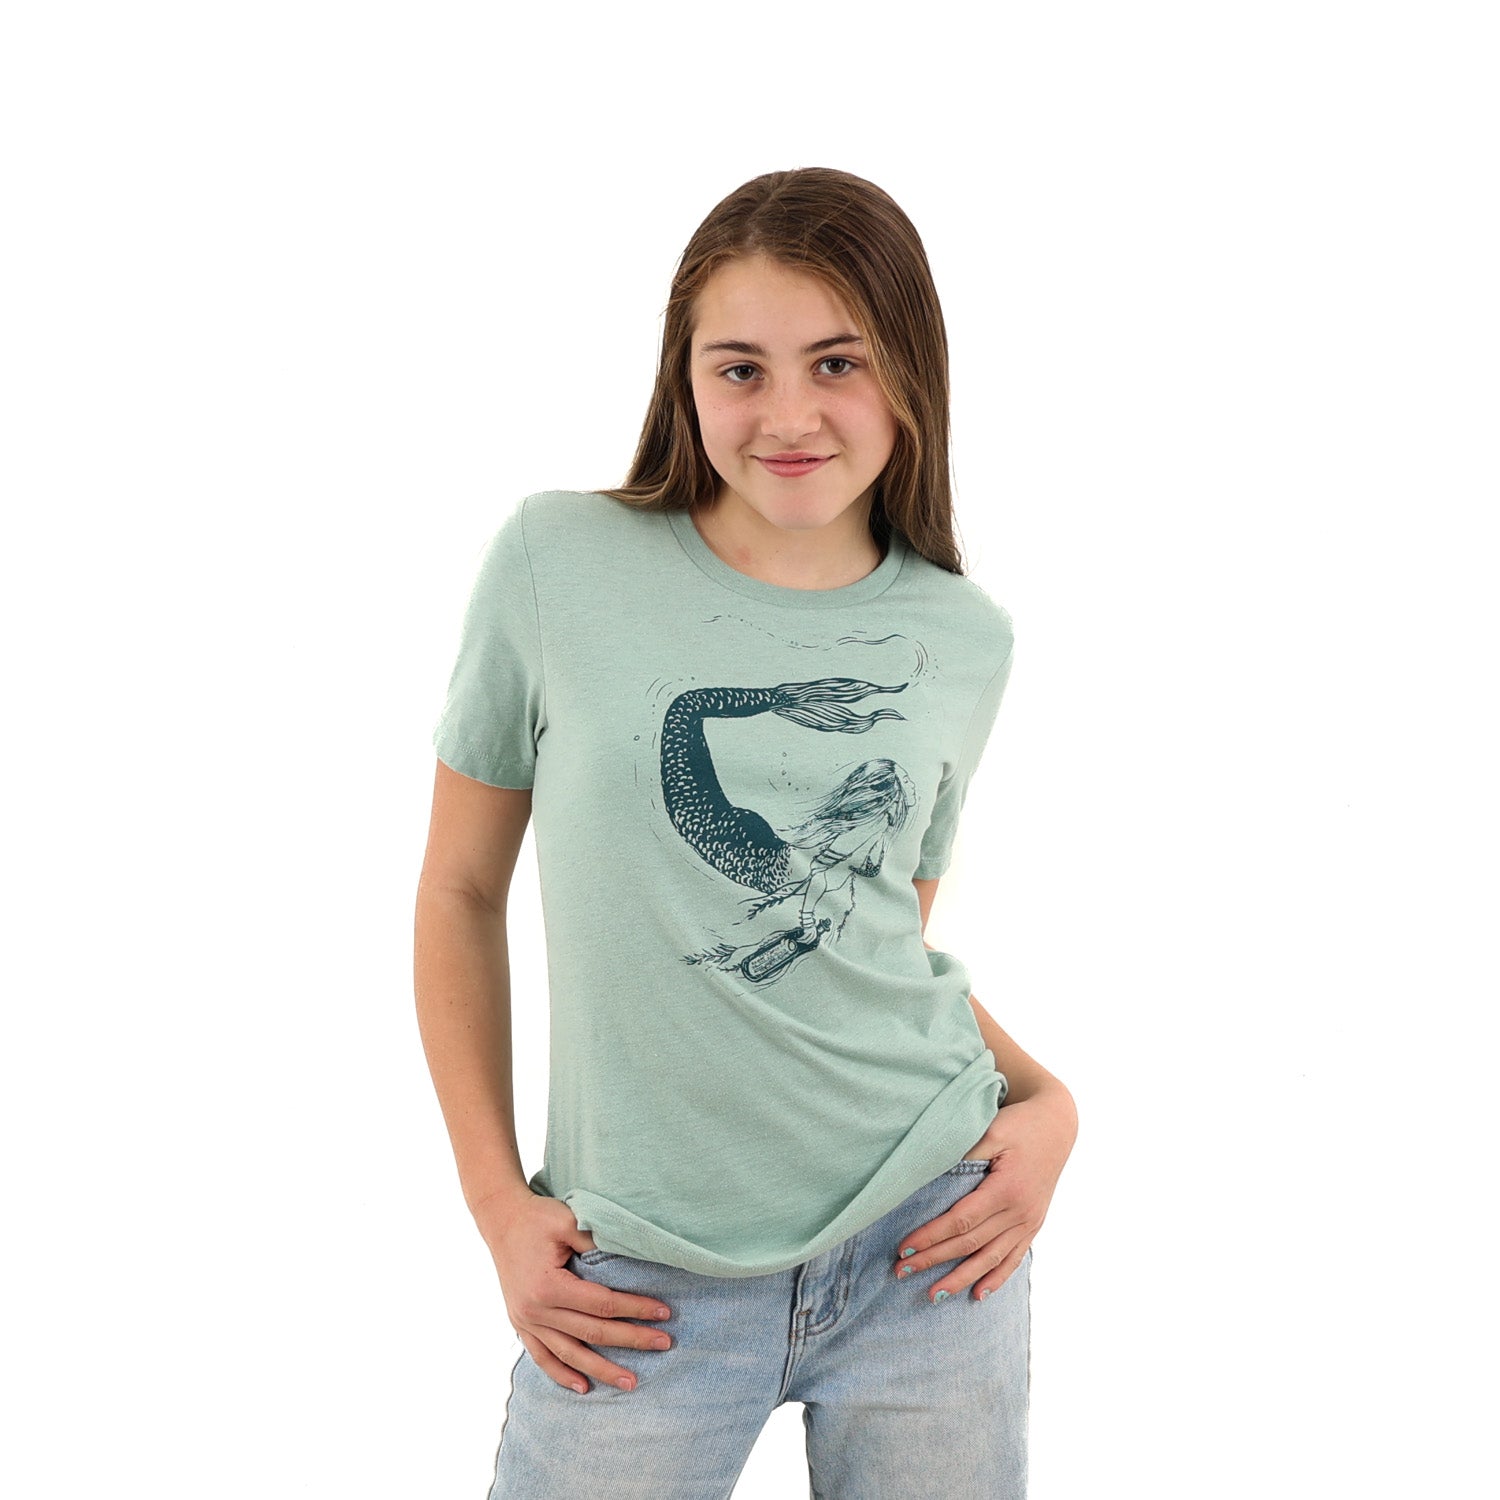 Girl wearing light green t shirt with a mermaid printed in green ink